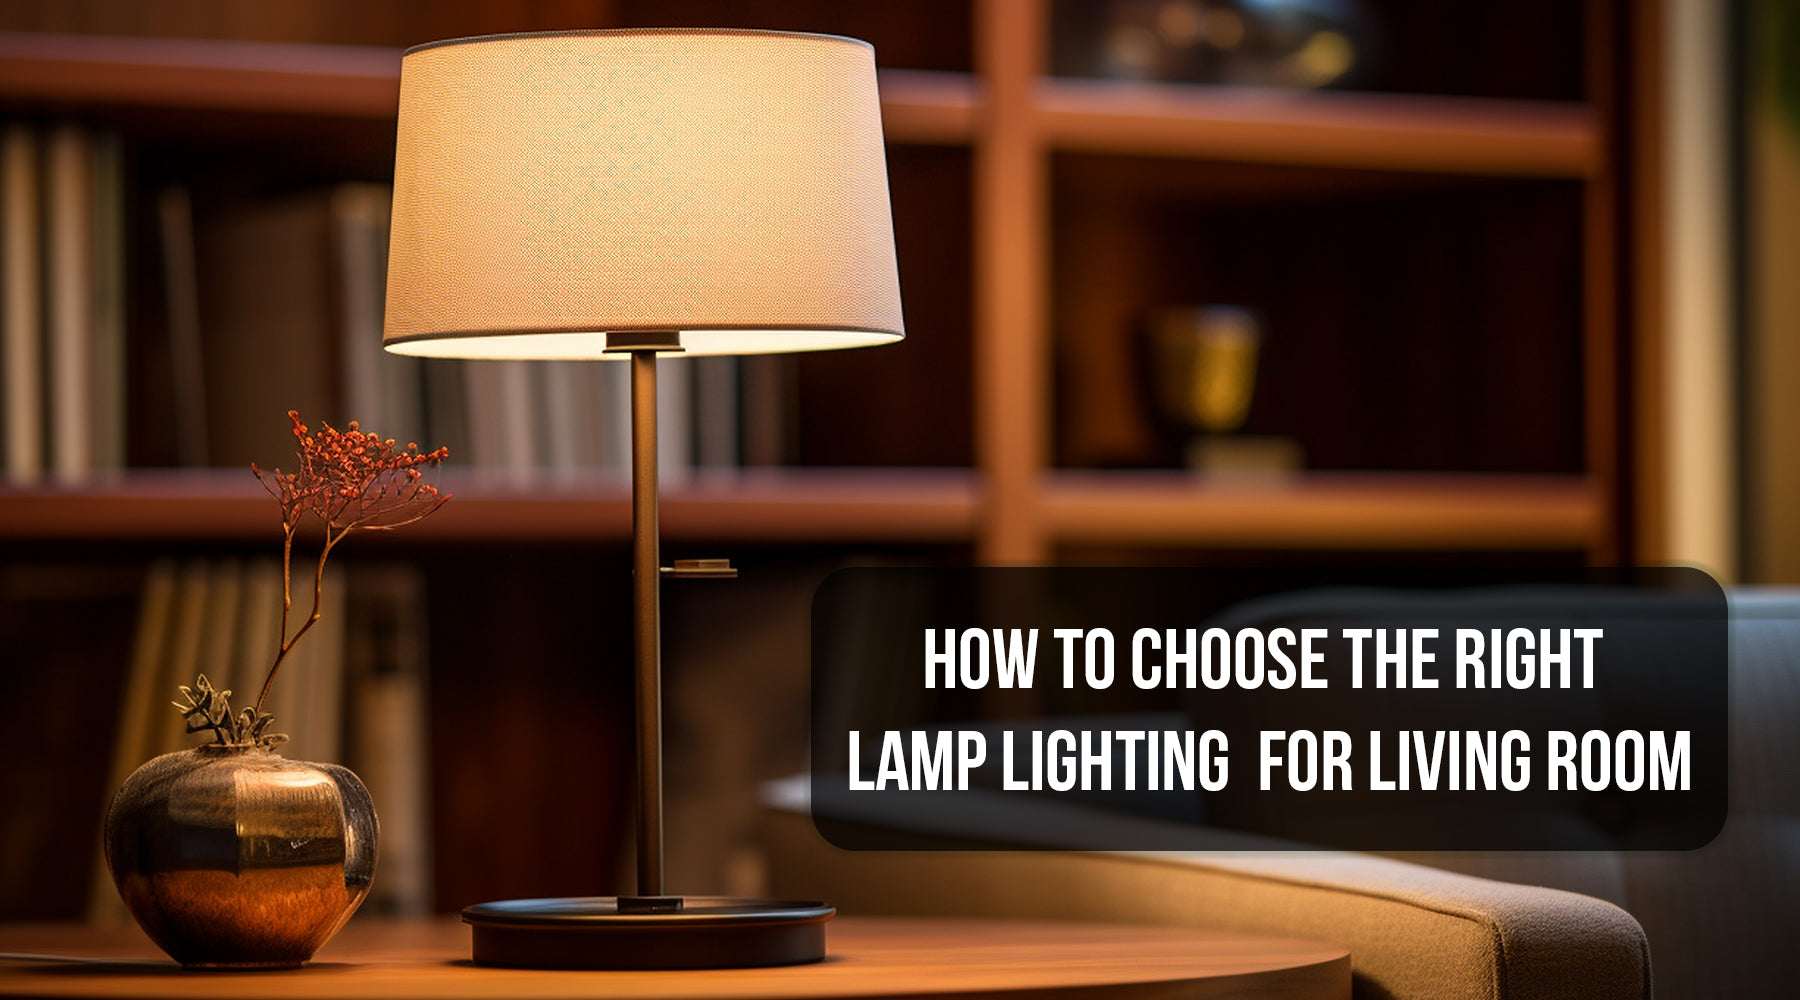 How to Choose the Right Lamp Lighting for Living Room